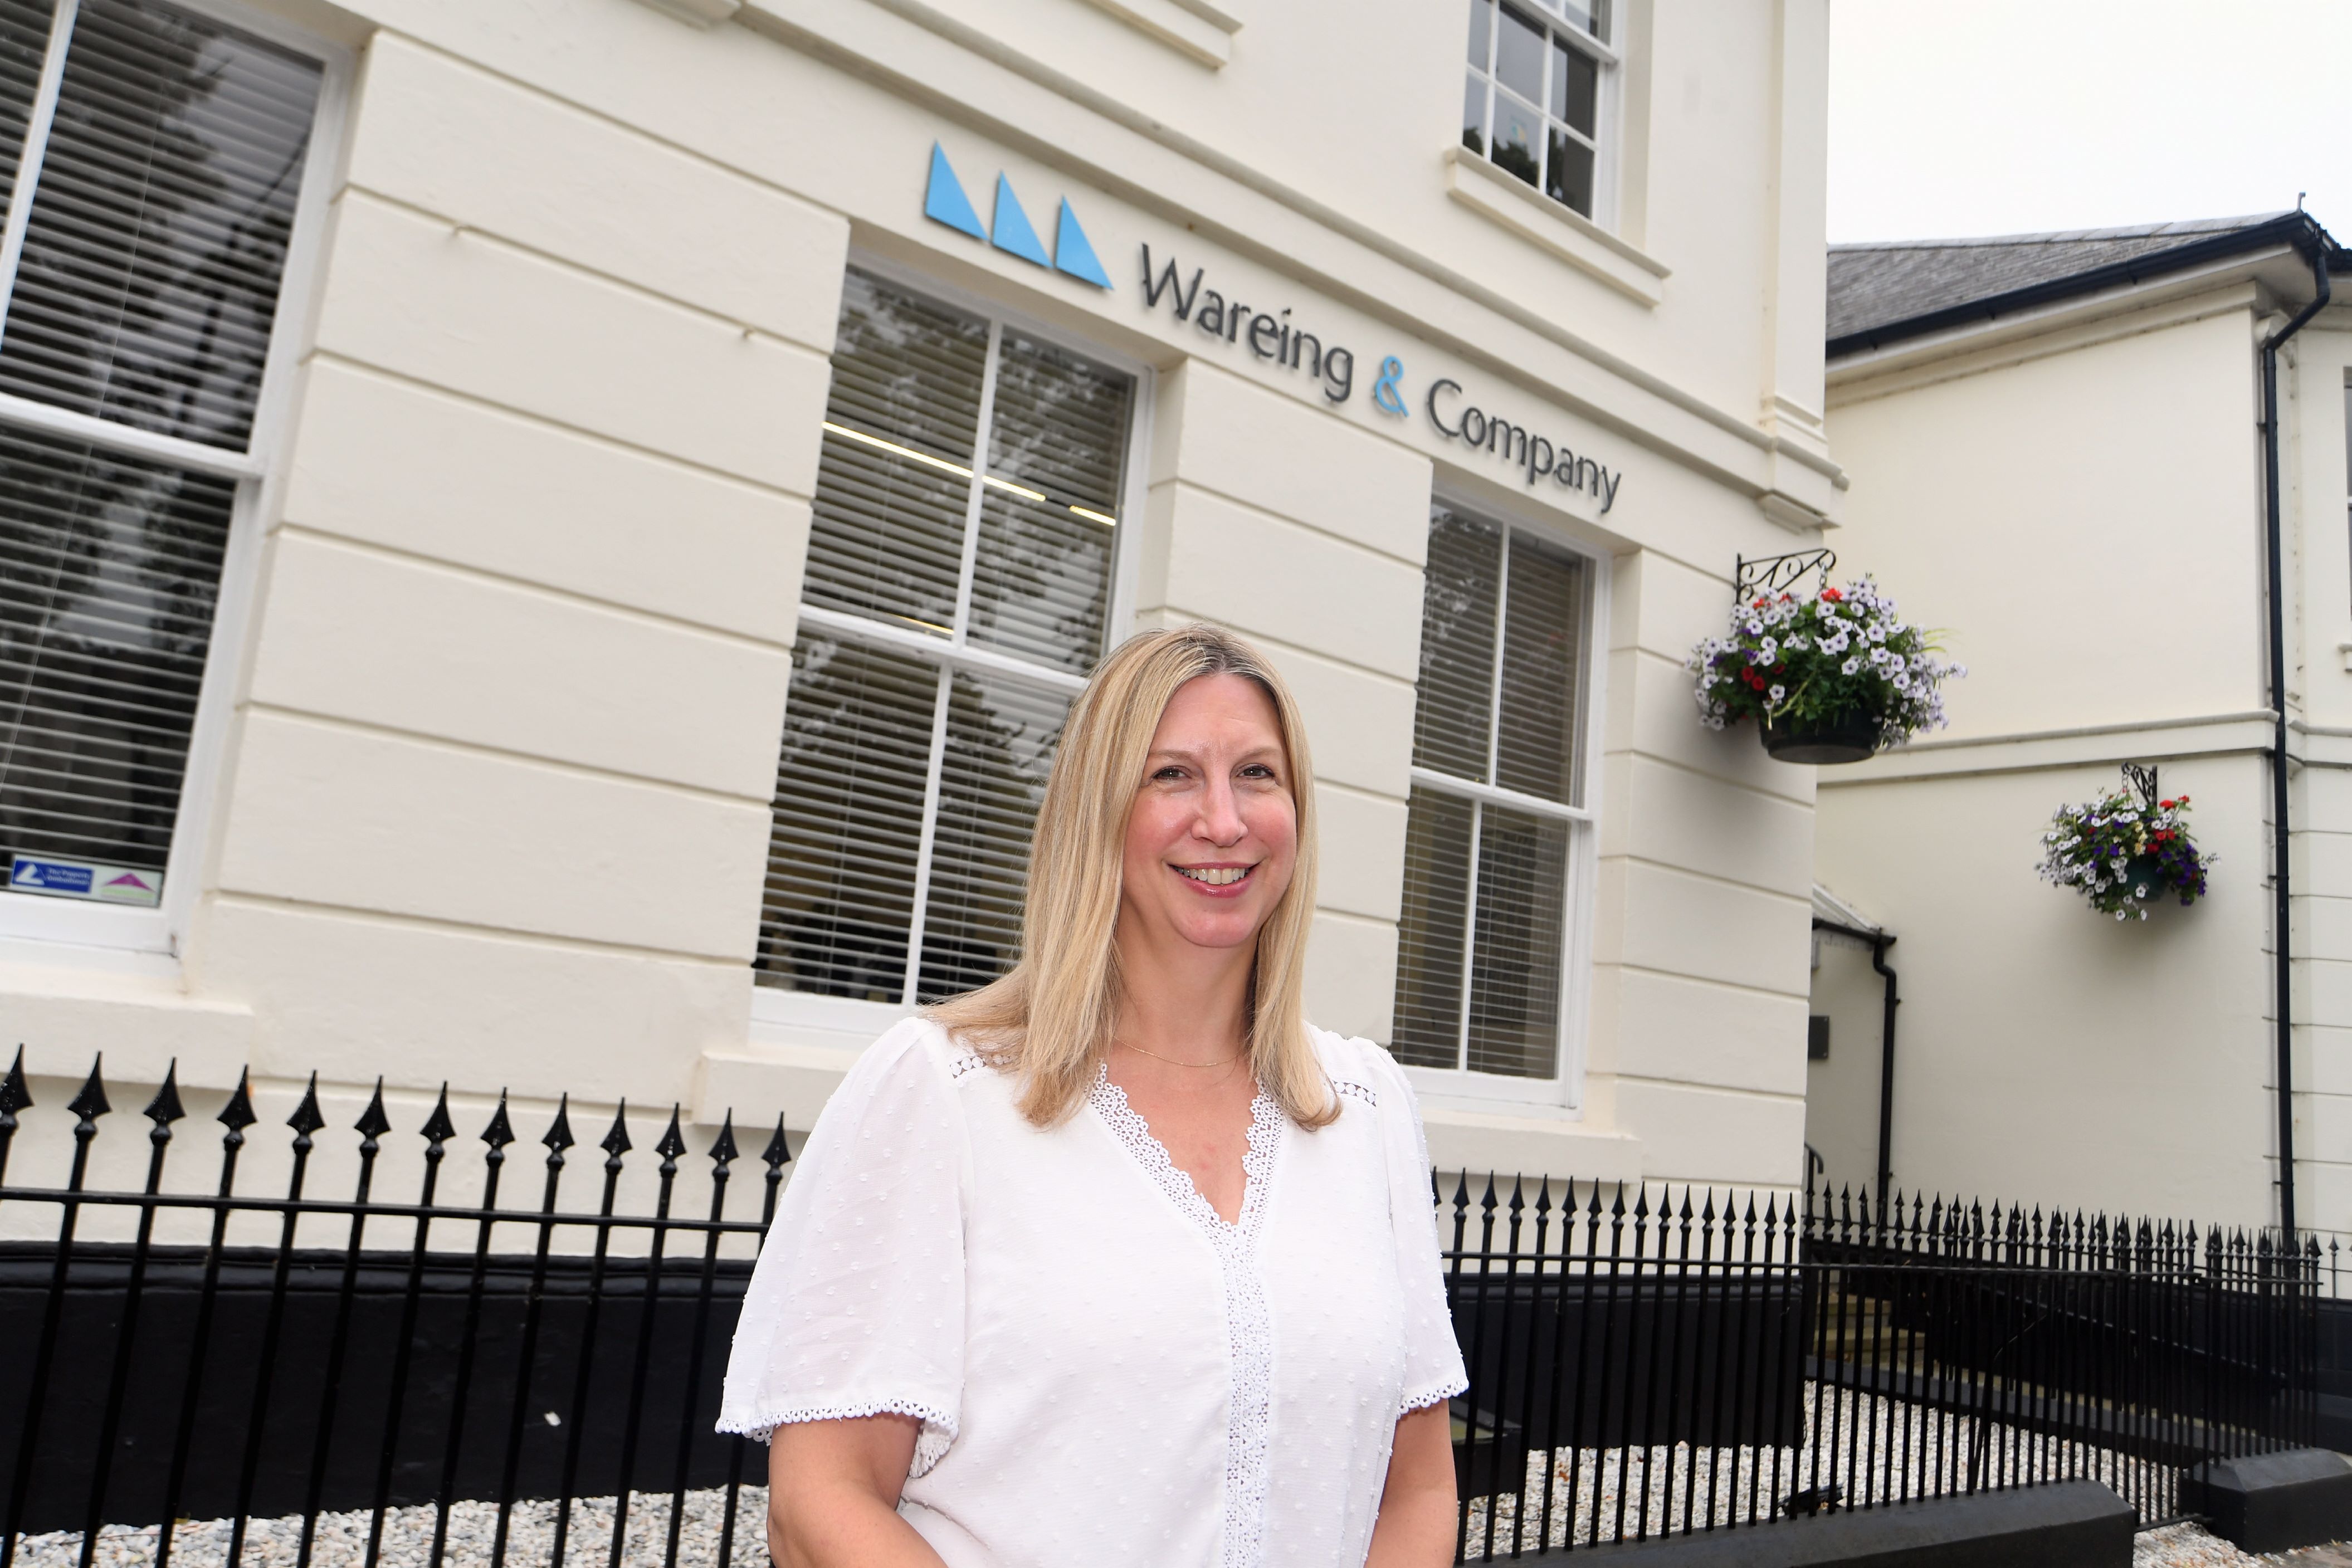 Julie Bevan has been promoted to Office Manager